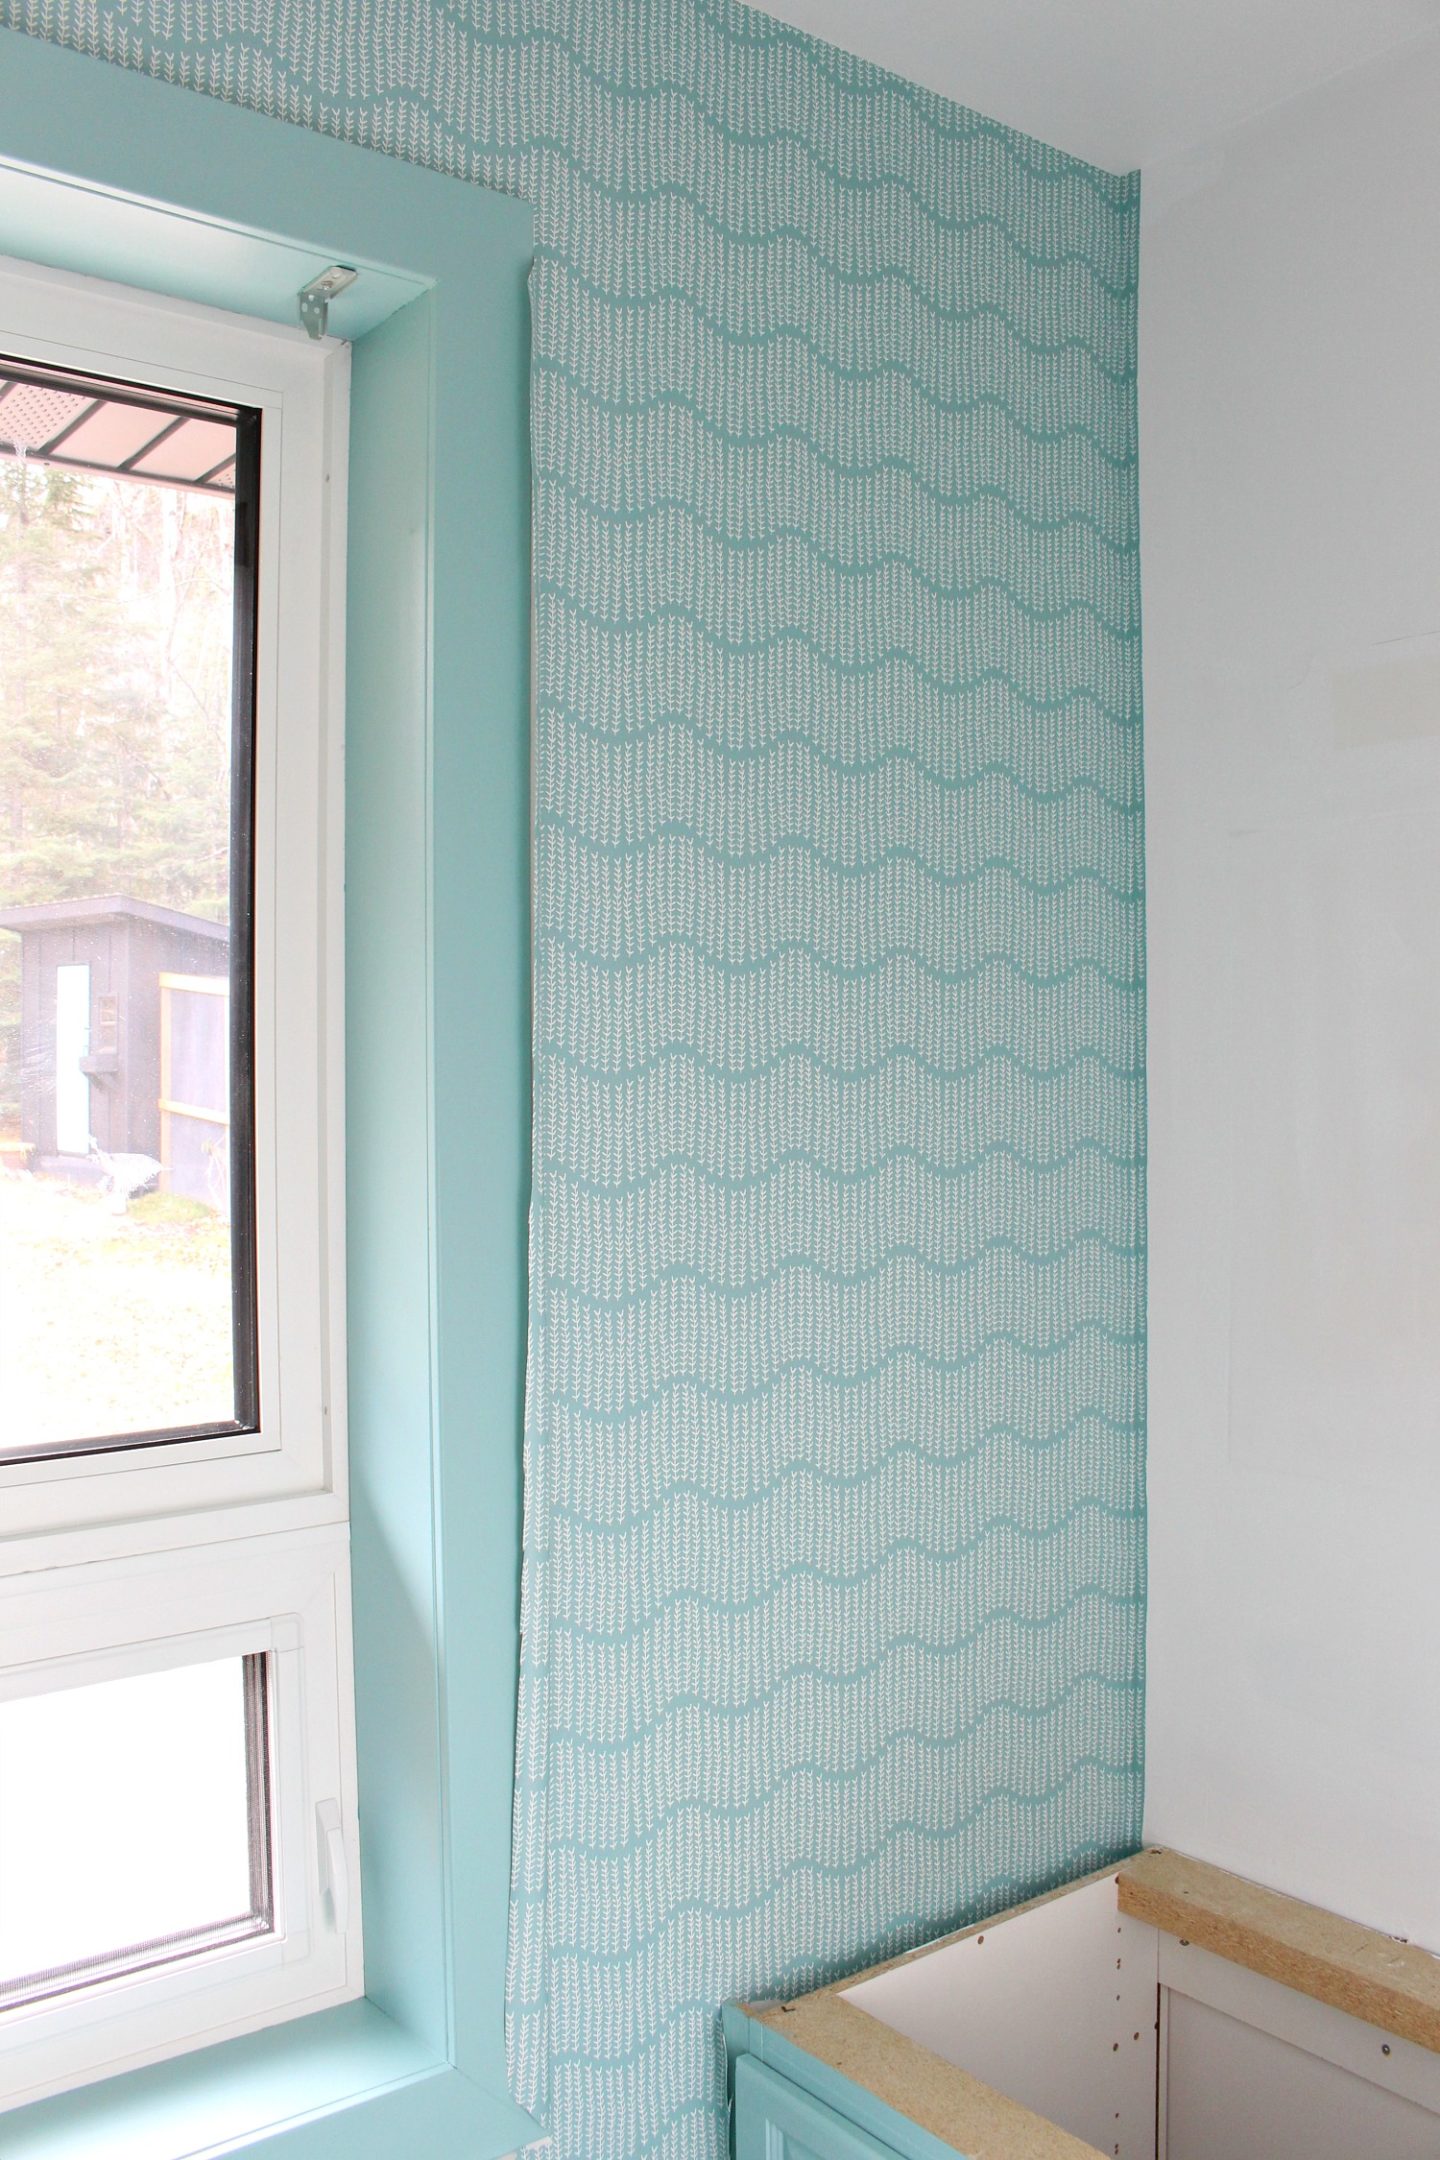 Spoonflower wallpaper installation and first impression review  YouTube